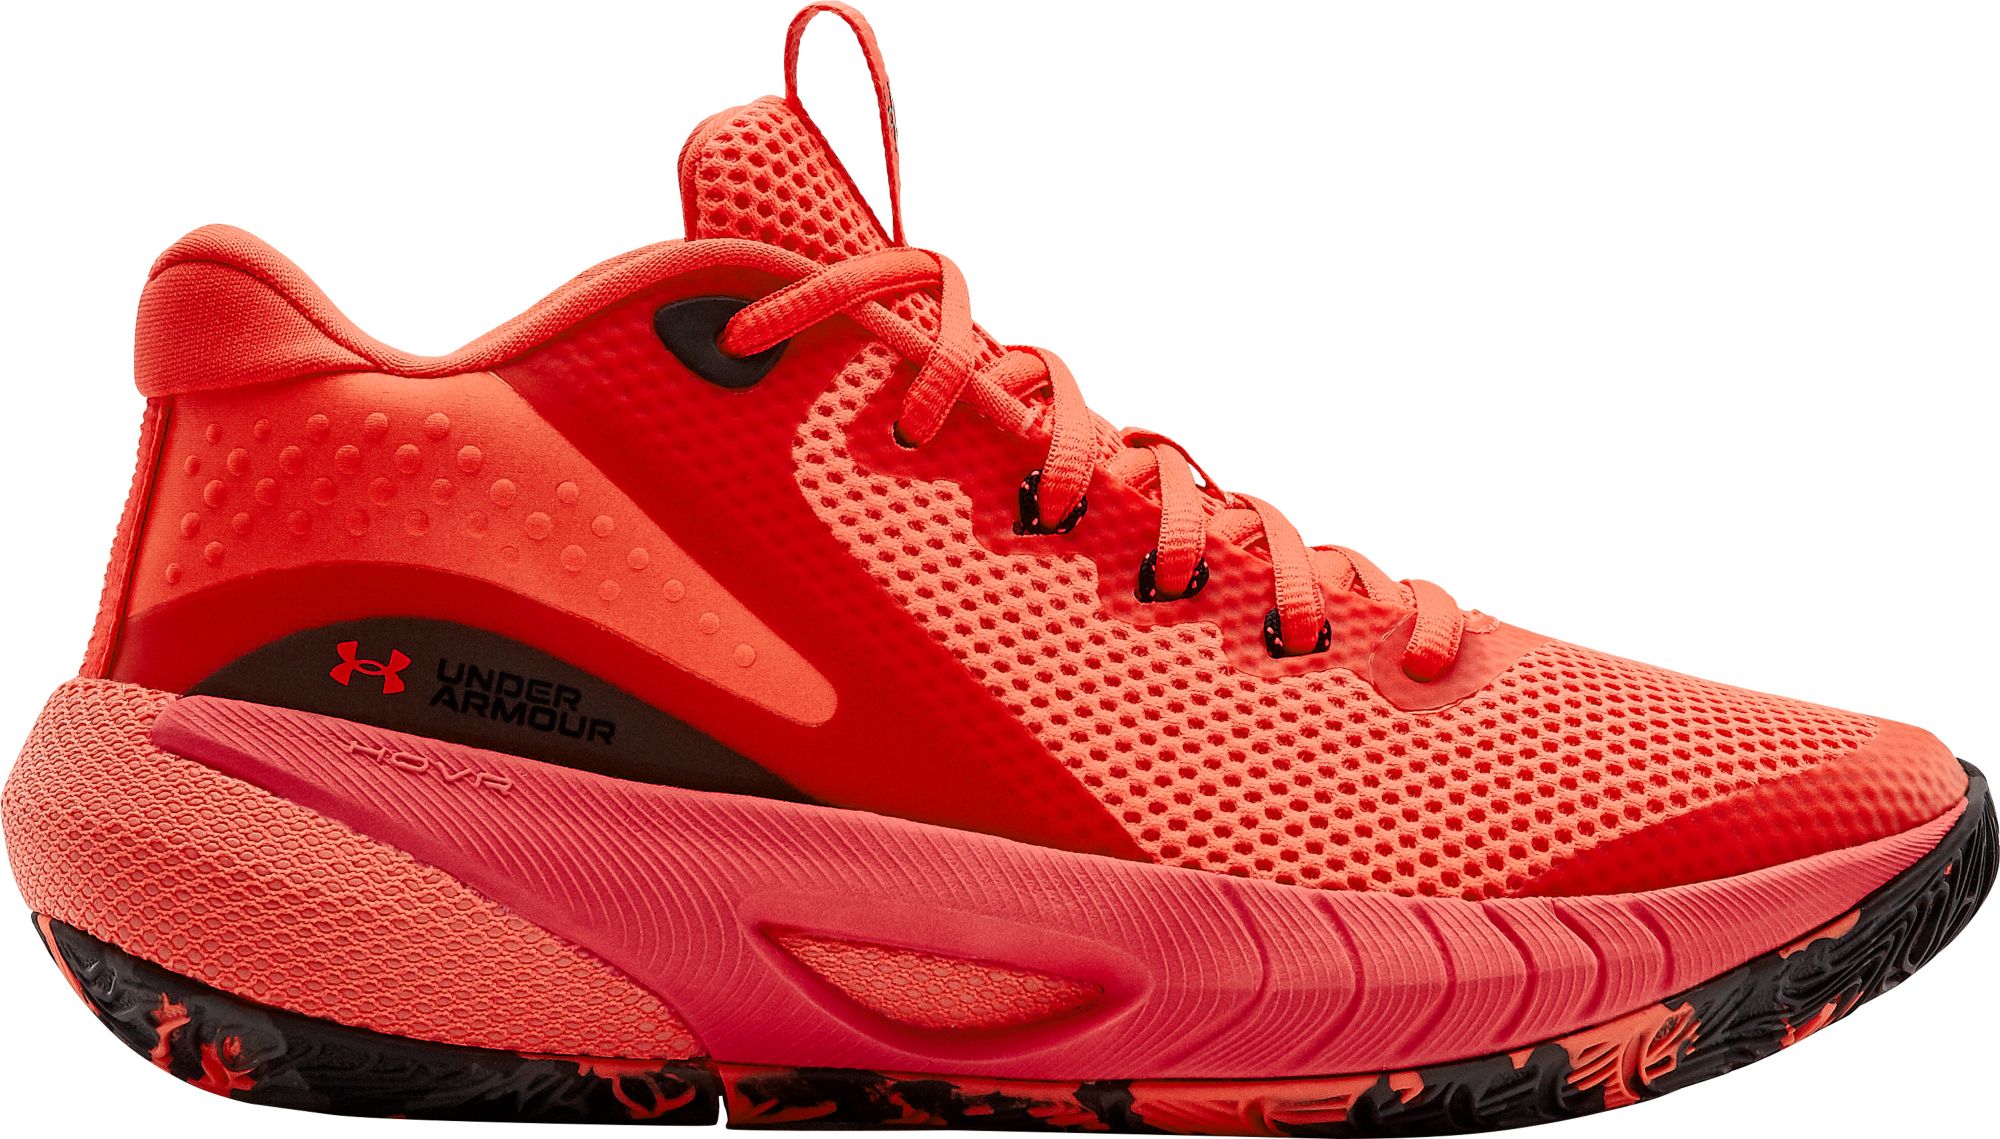 under armor girls basketball shoes